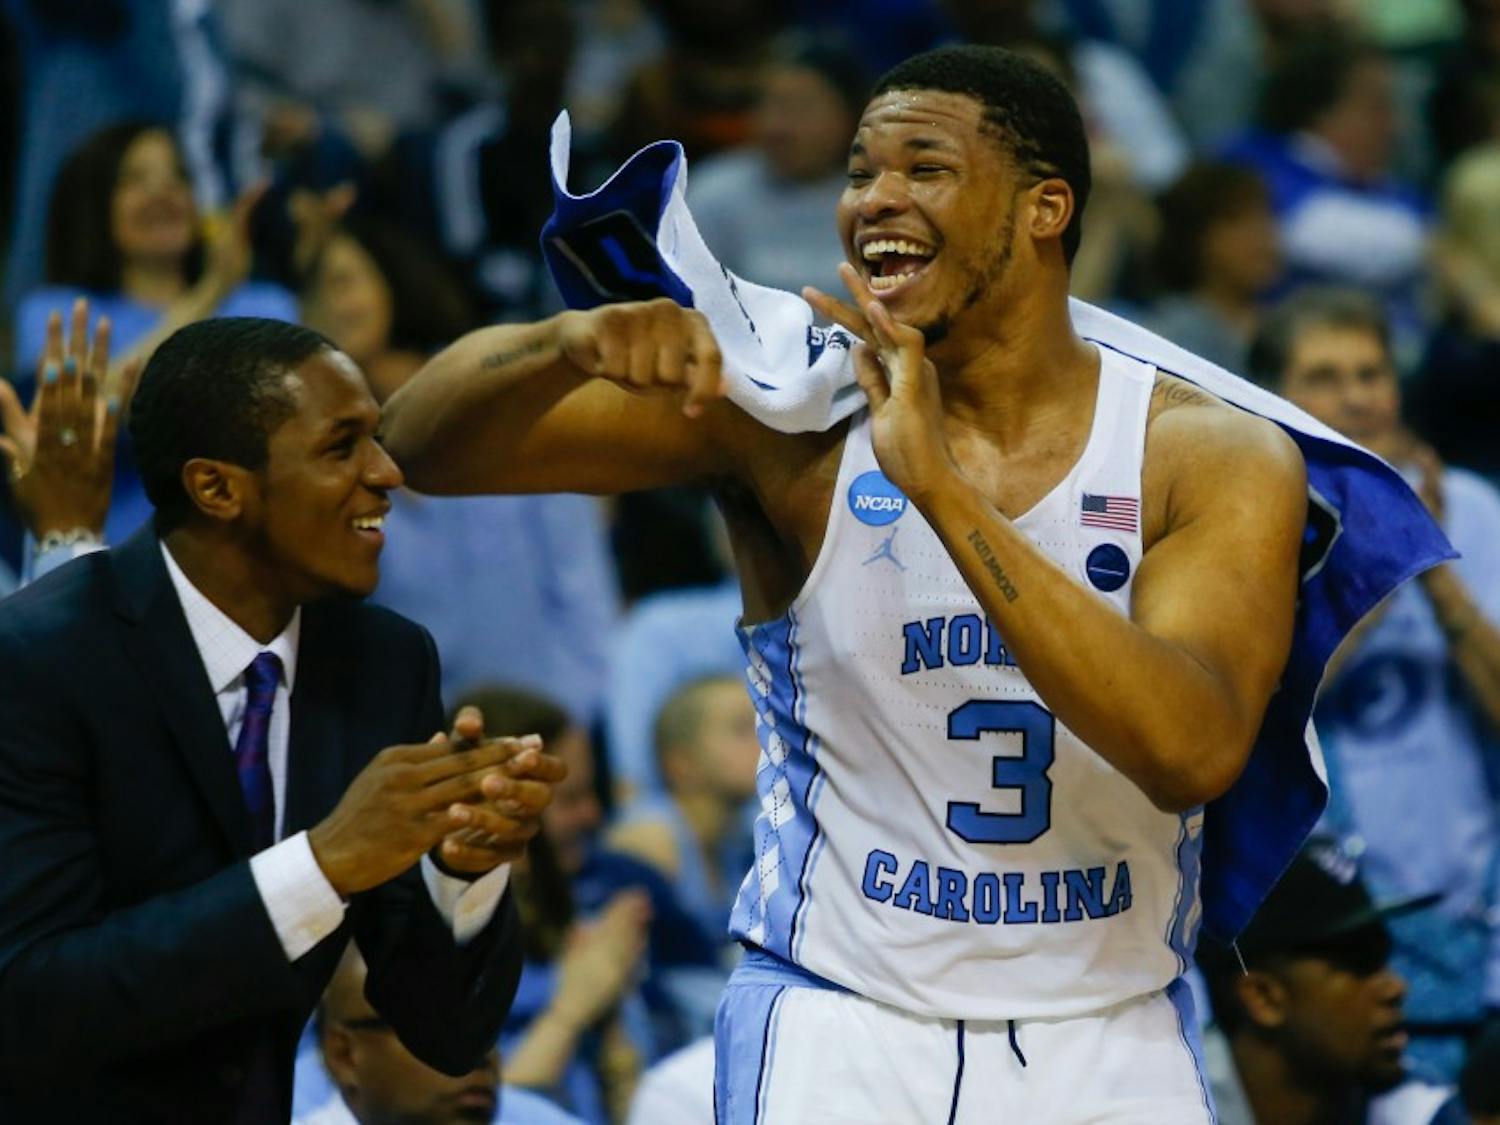 The North Carolina men's basketball team defeated Butler 92-80 in their Sweet 16 matchup on Friday in Memphis.